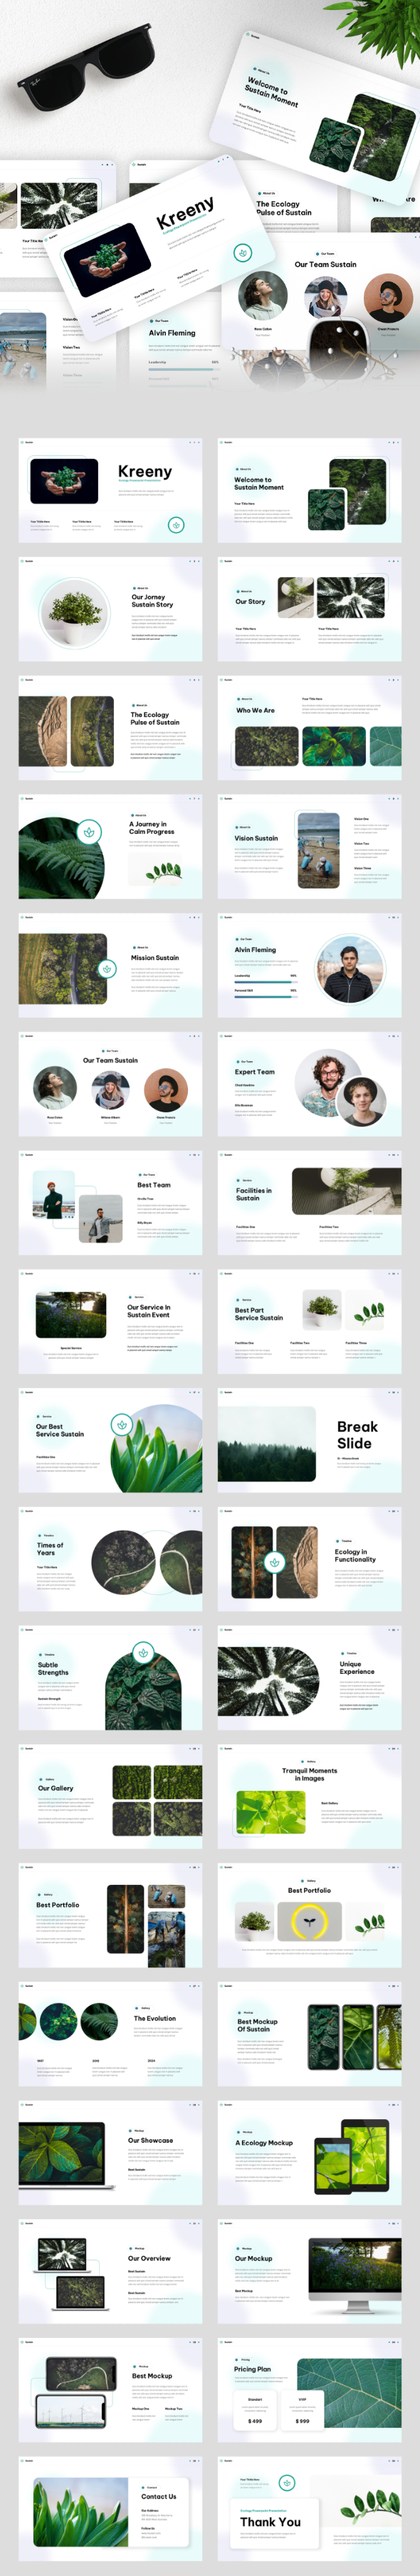 [DOWNLOAD]Kreeny - Ecology & Sustainable Keynote Template